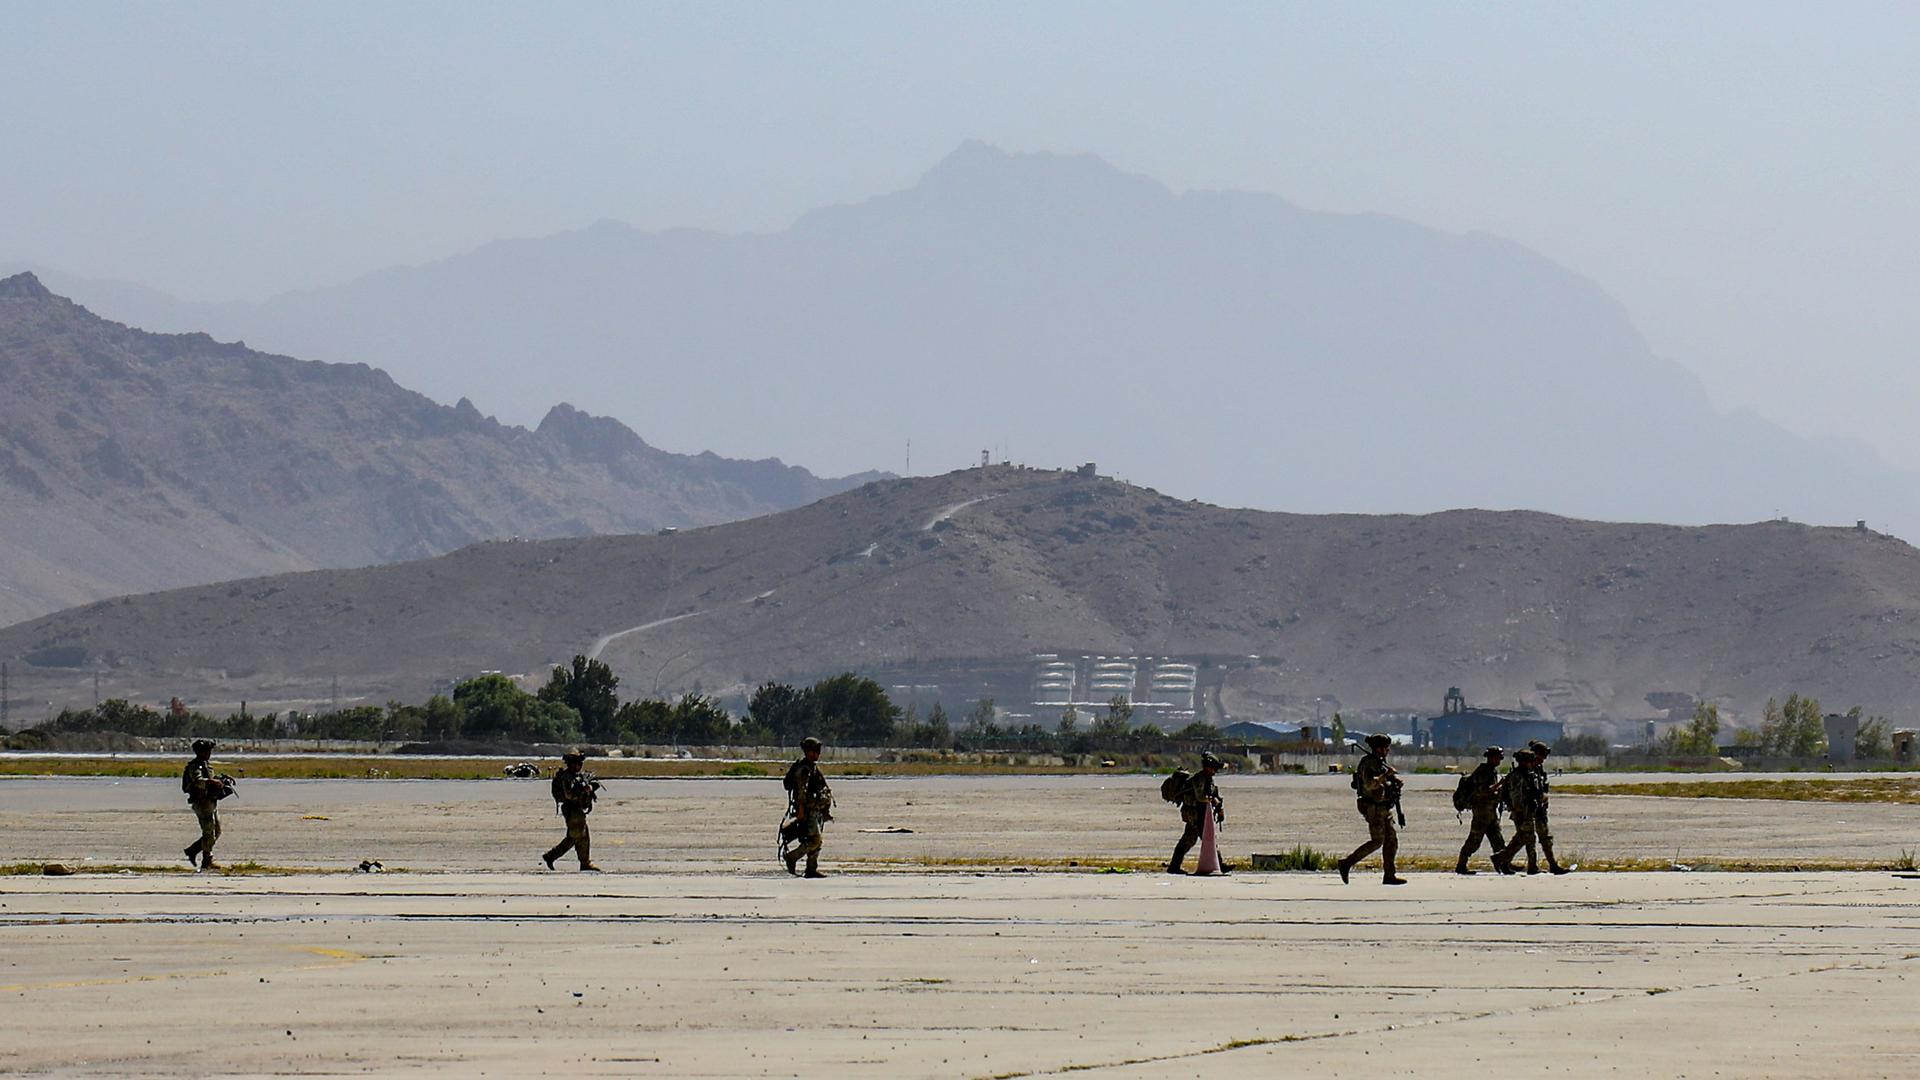 Several military officers are shown in a line, and heavily armed, walking on an open tarmac area with mountains in the distance.